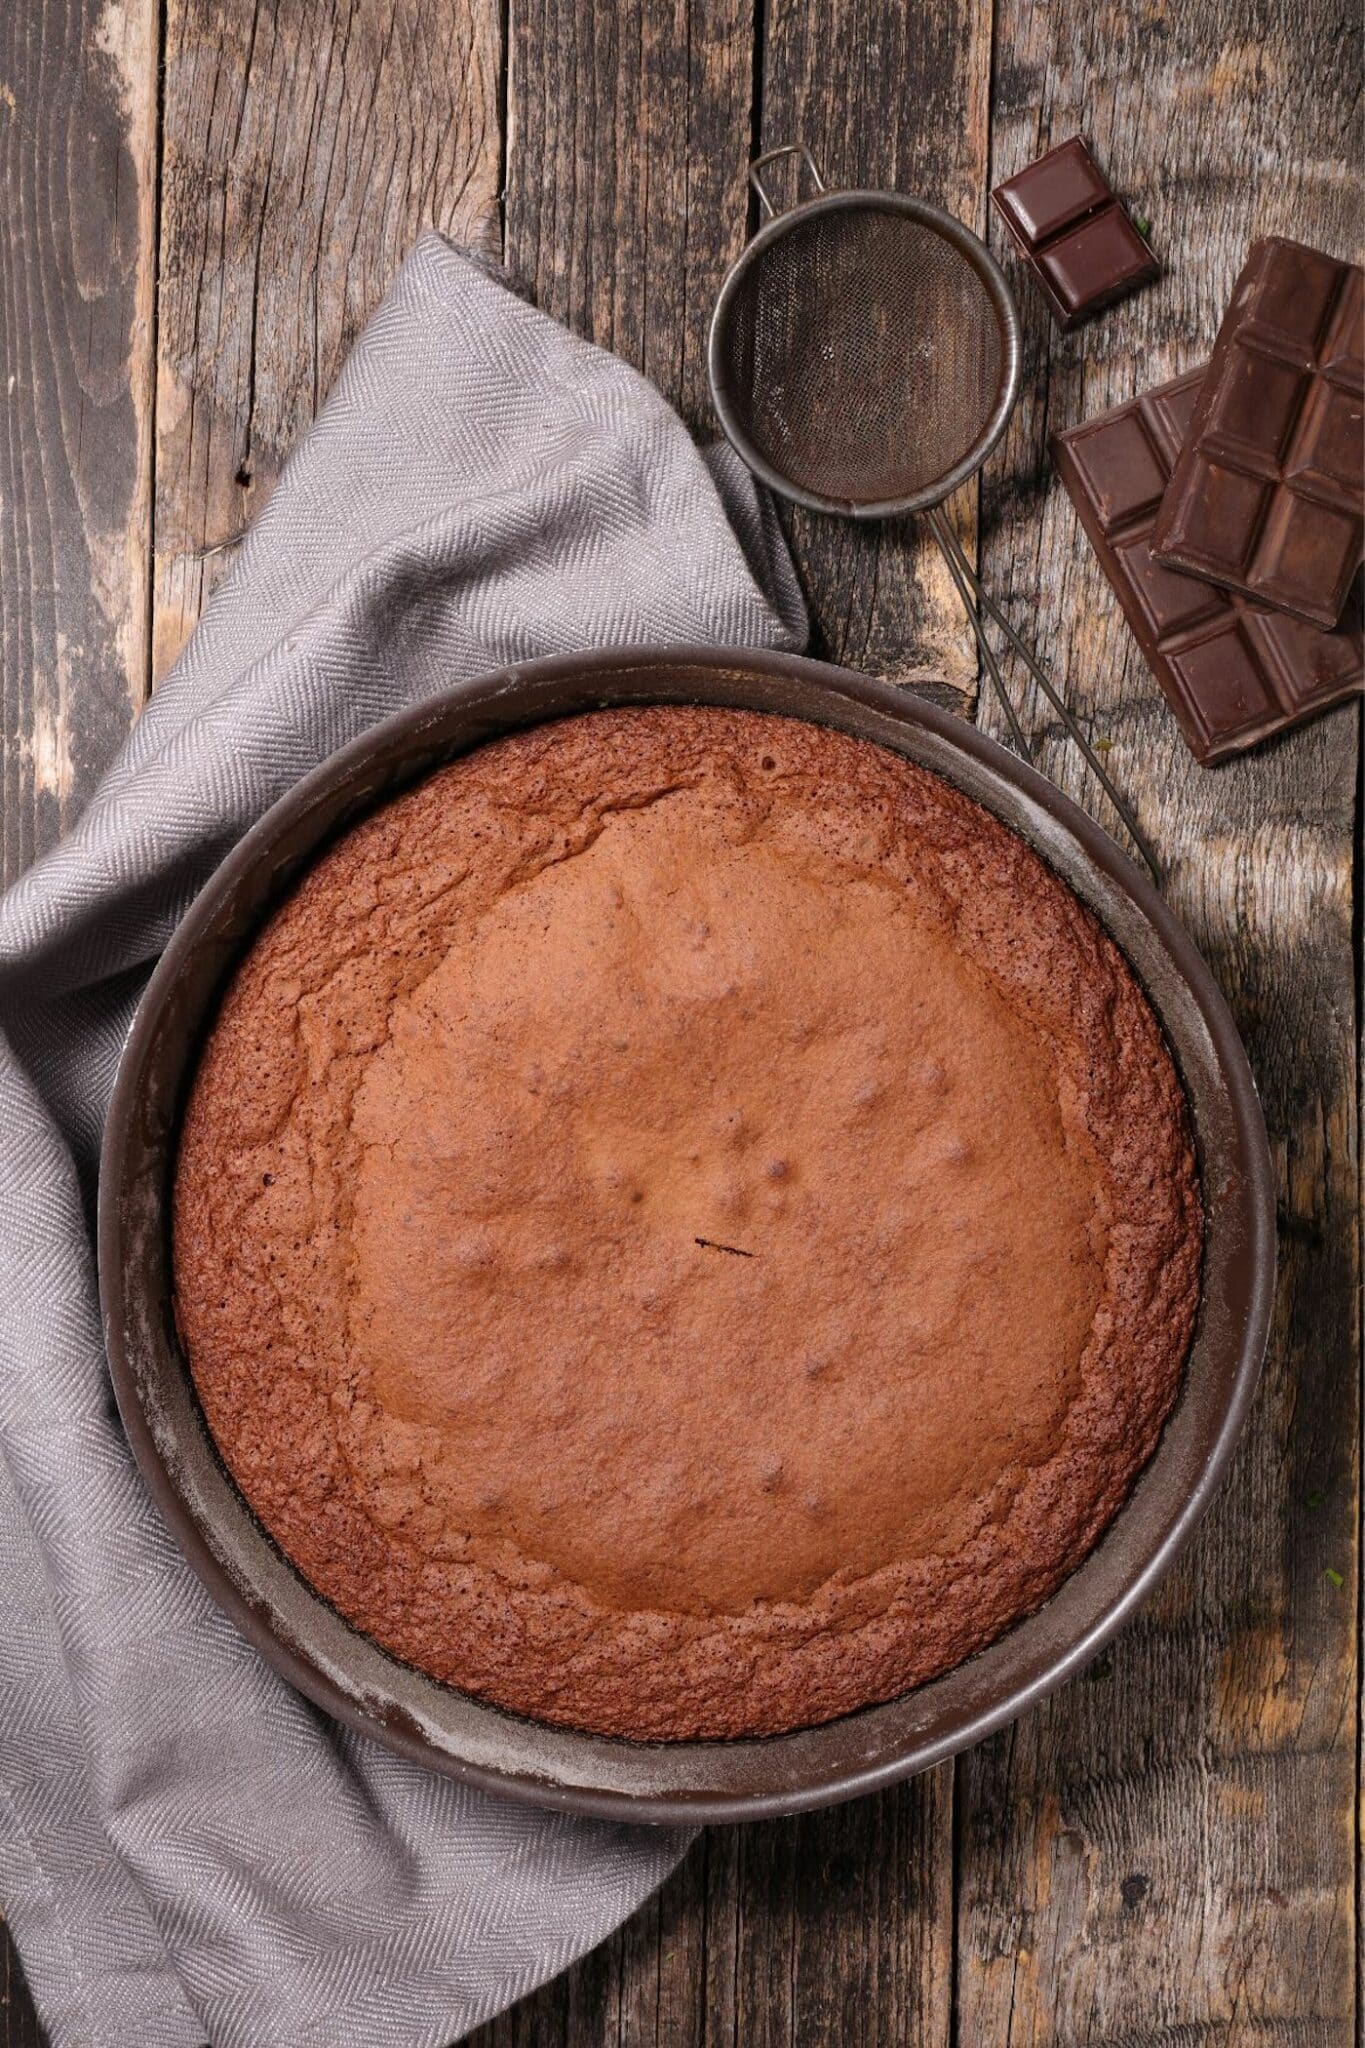 A baked chocolate cake in a round metal cake pan.